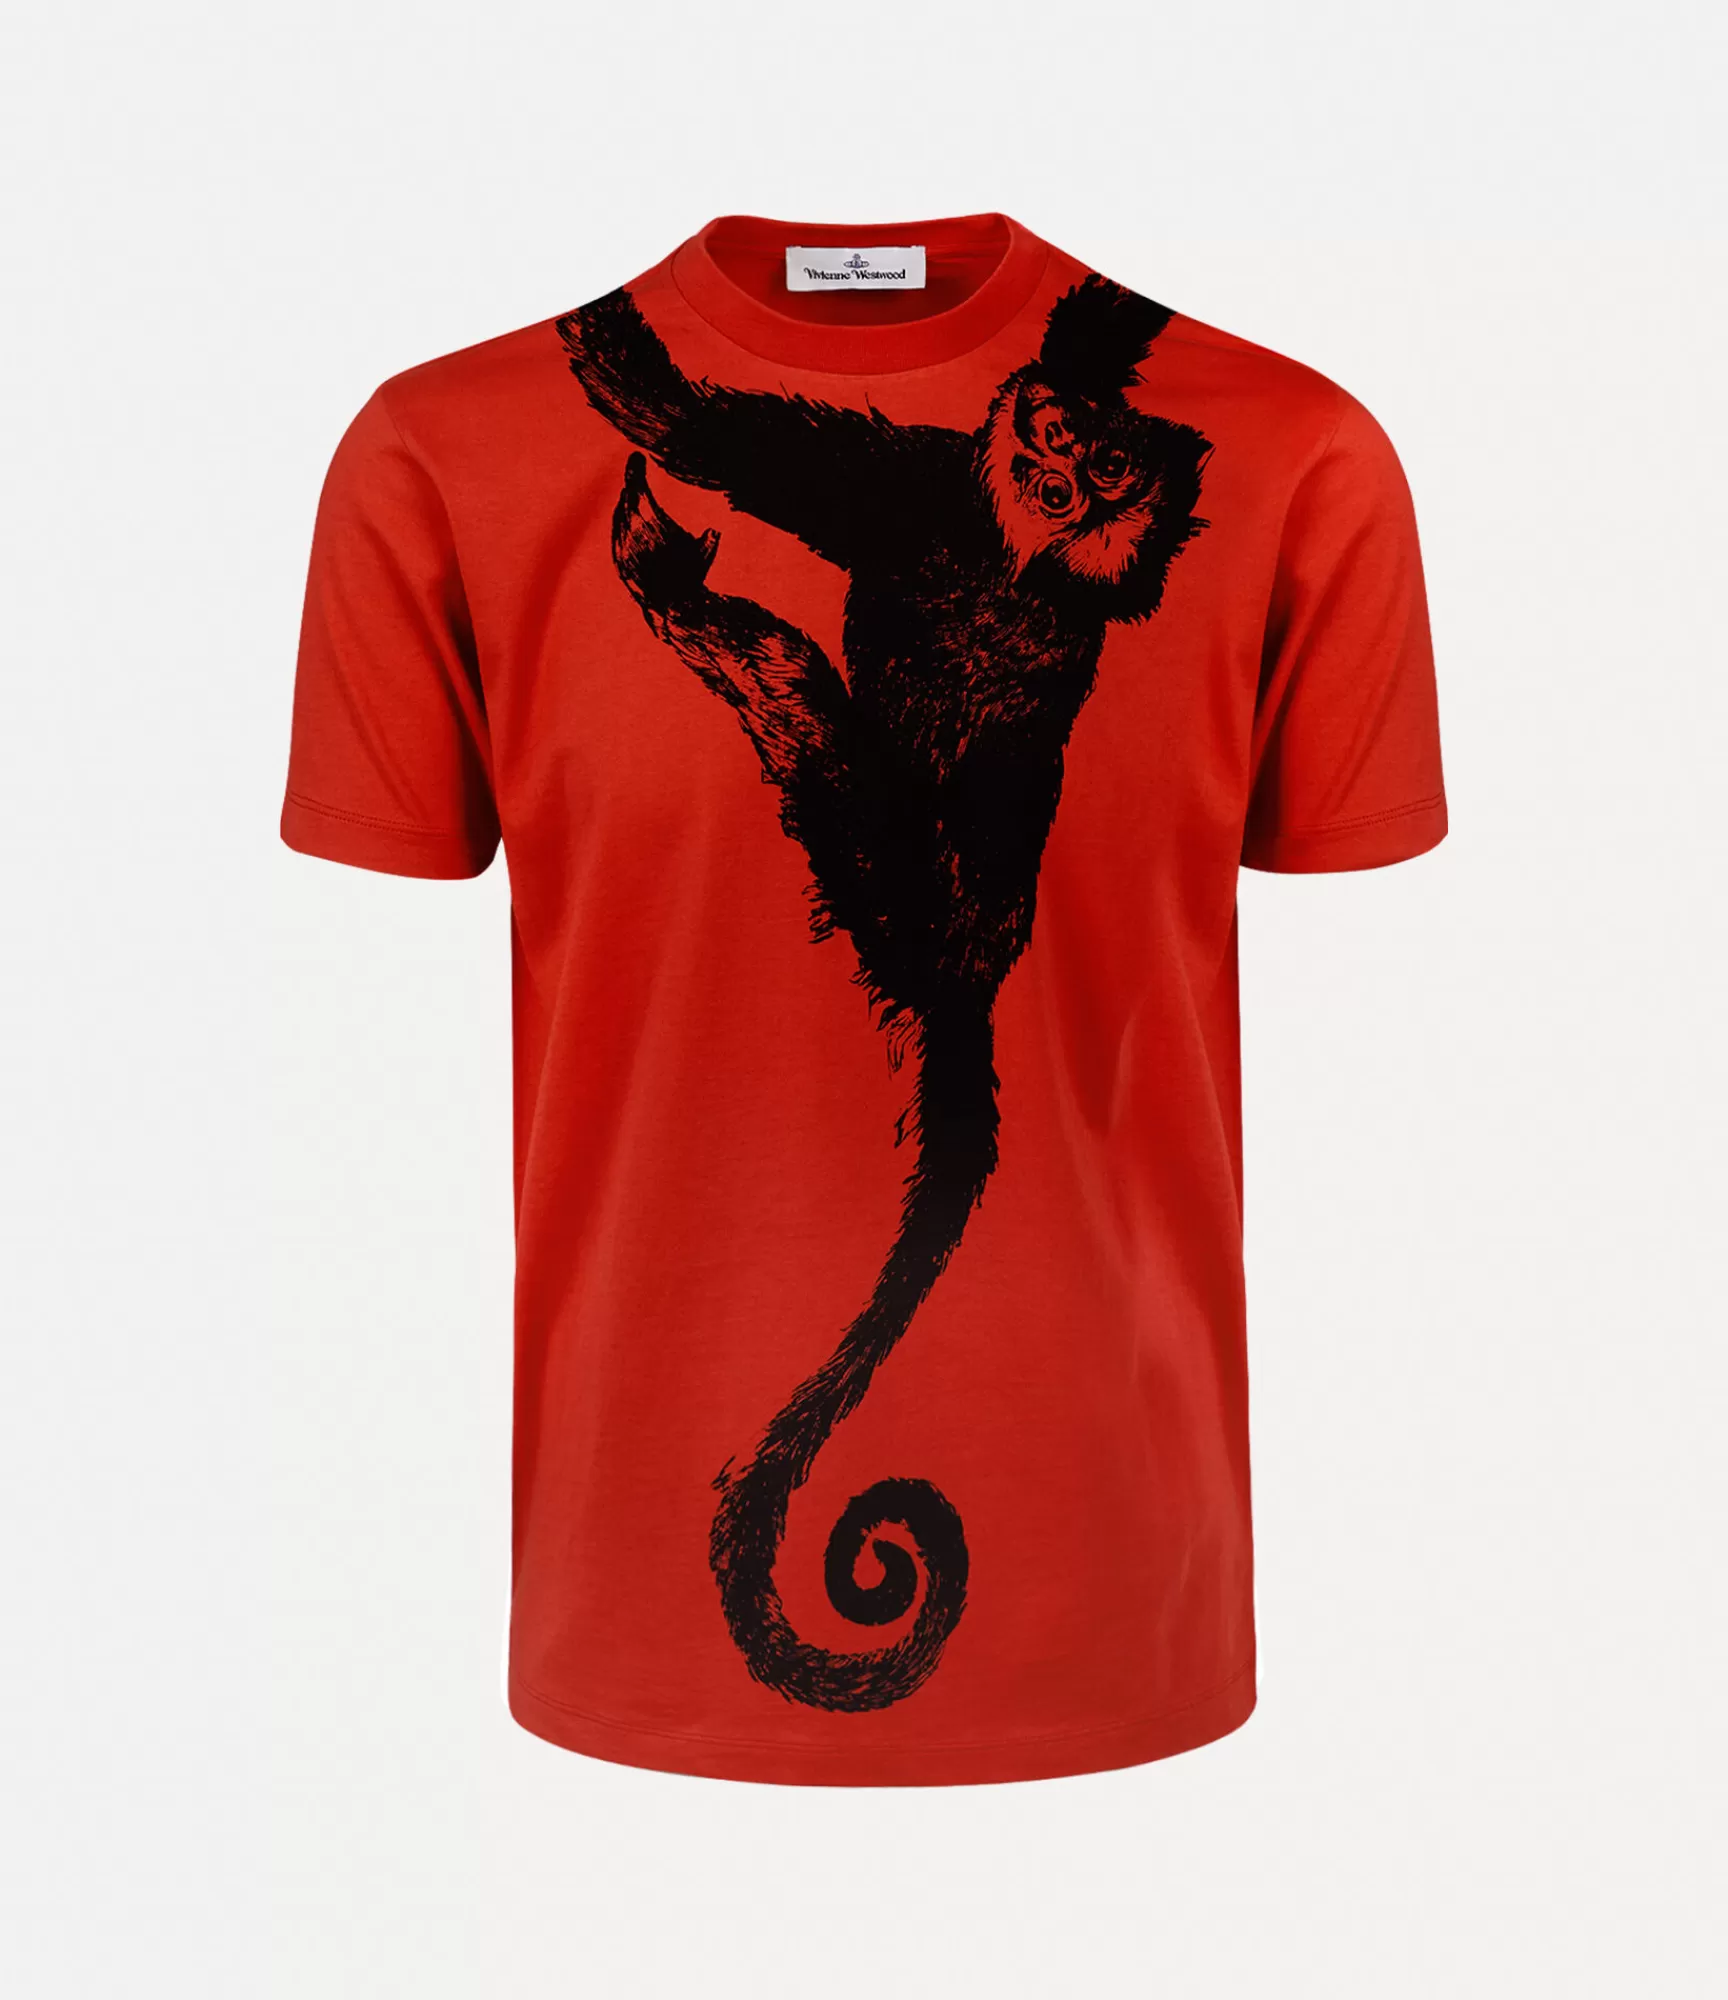 Vivienne Westwood T-Shirts and Polos | Sweatshirts and T-Shirts*MONKEY CLASSIC T-SHIRT Red